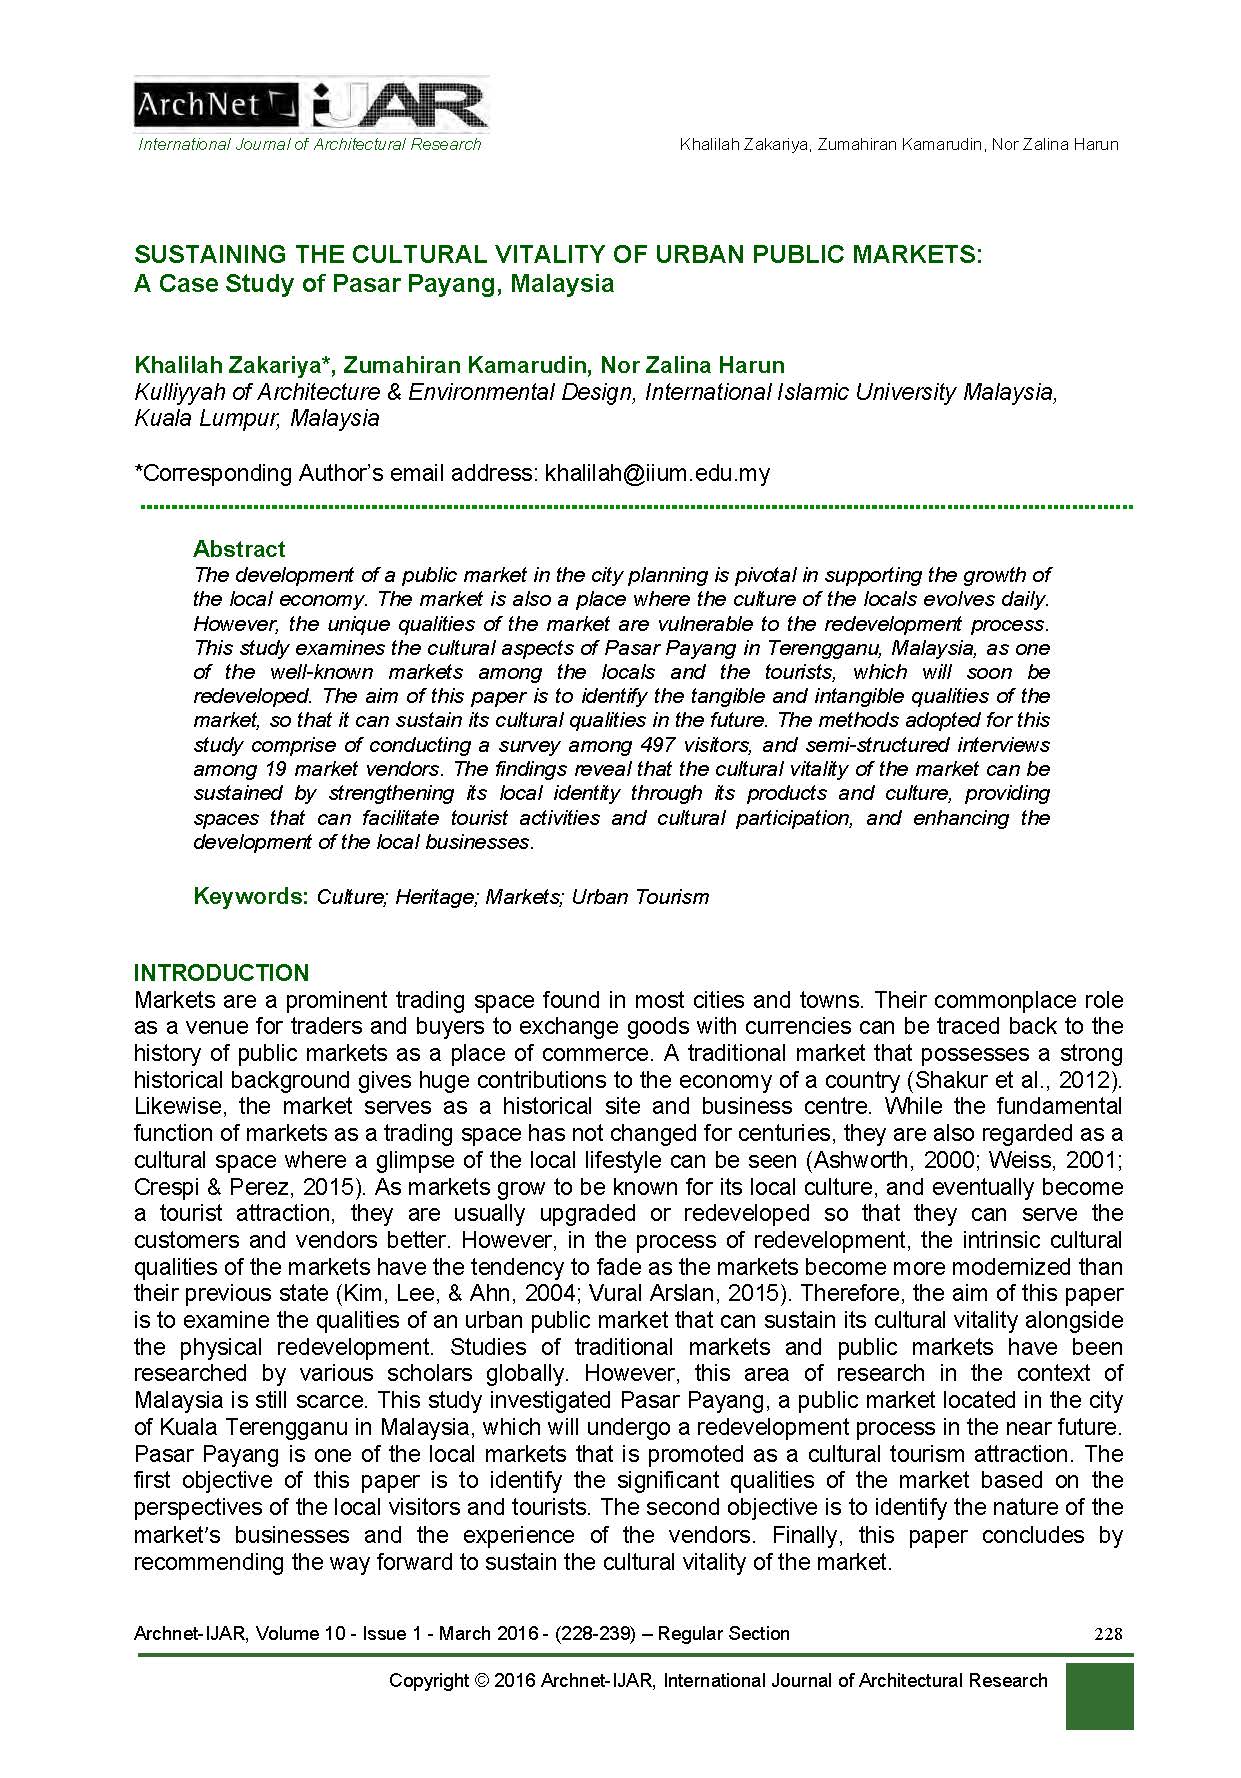 SUSTAINING THE CULTURAL VITALITY OF URBAN PUBLIC MARKETS: A Case Study of Pasar Payang, Malaysia